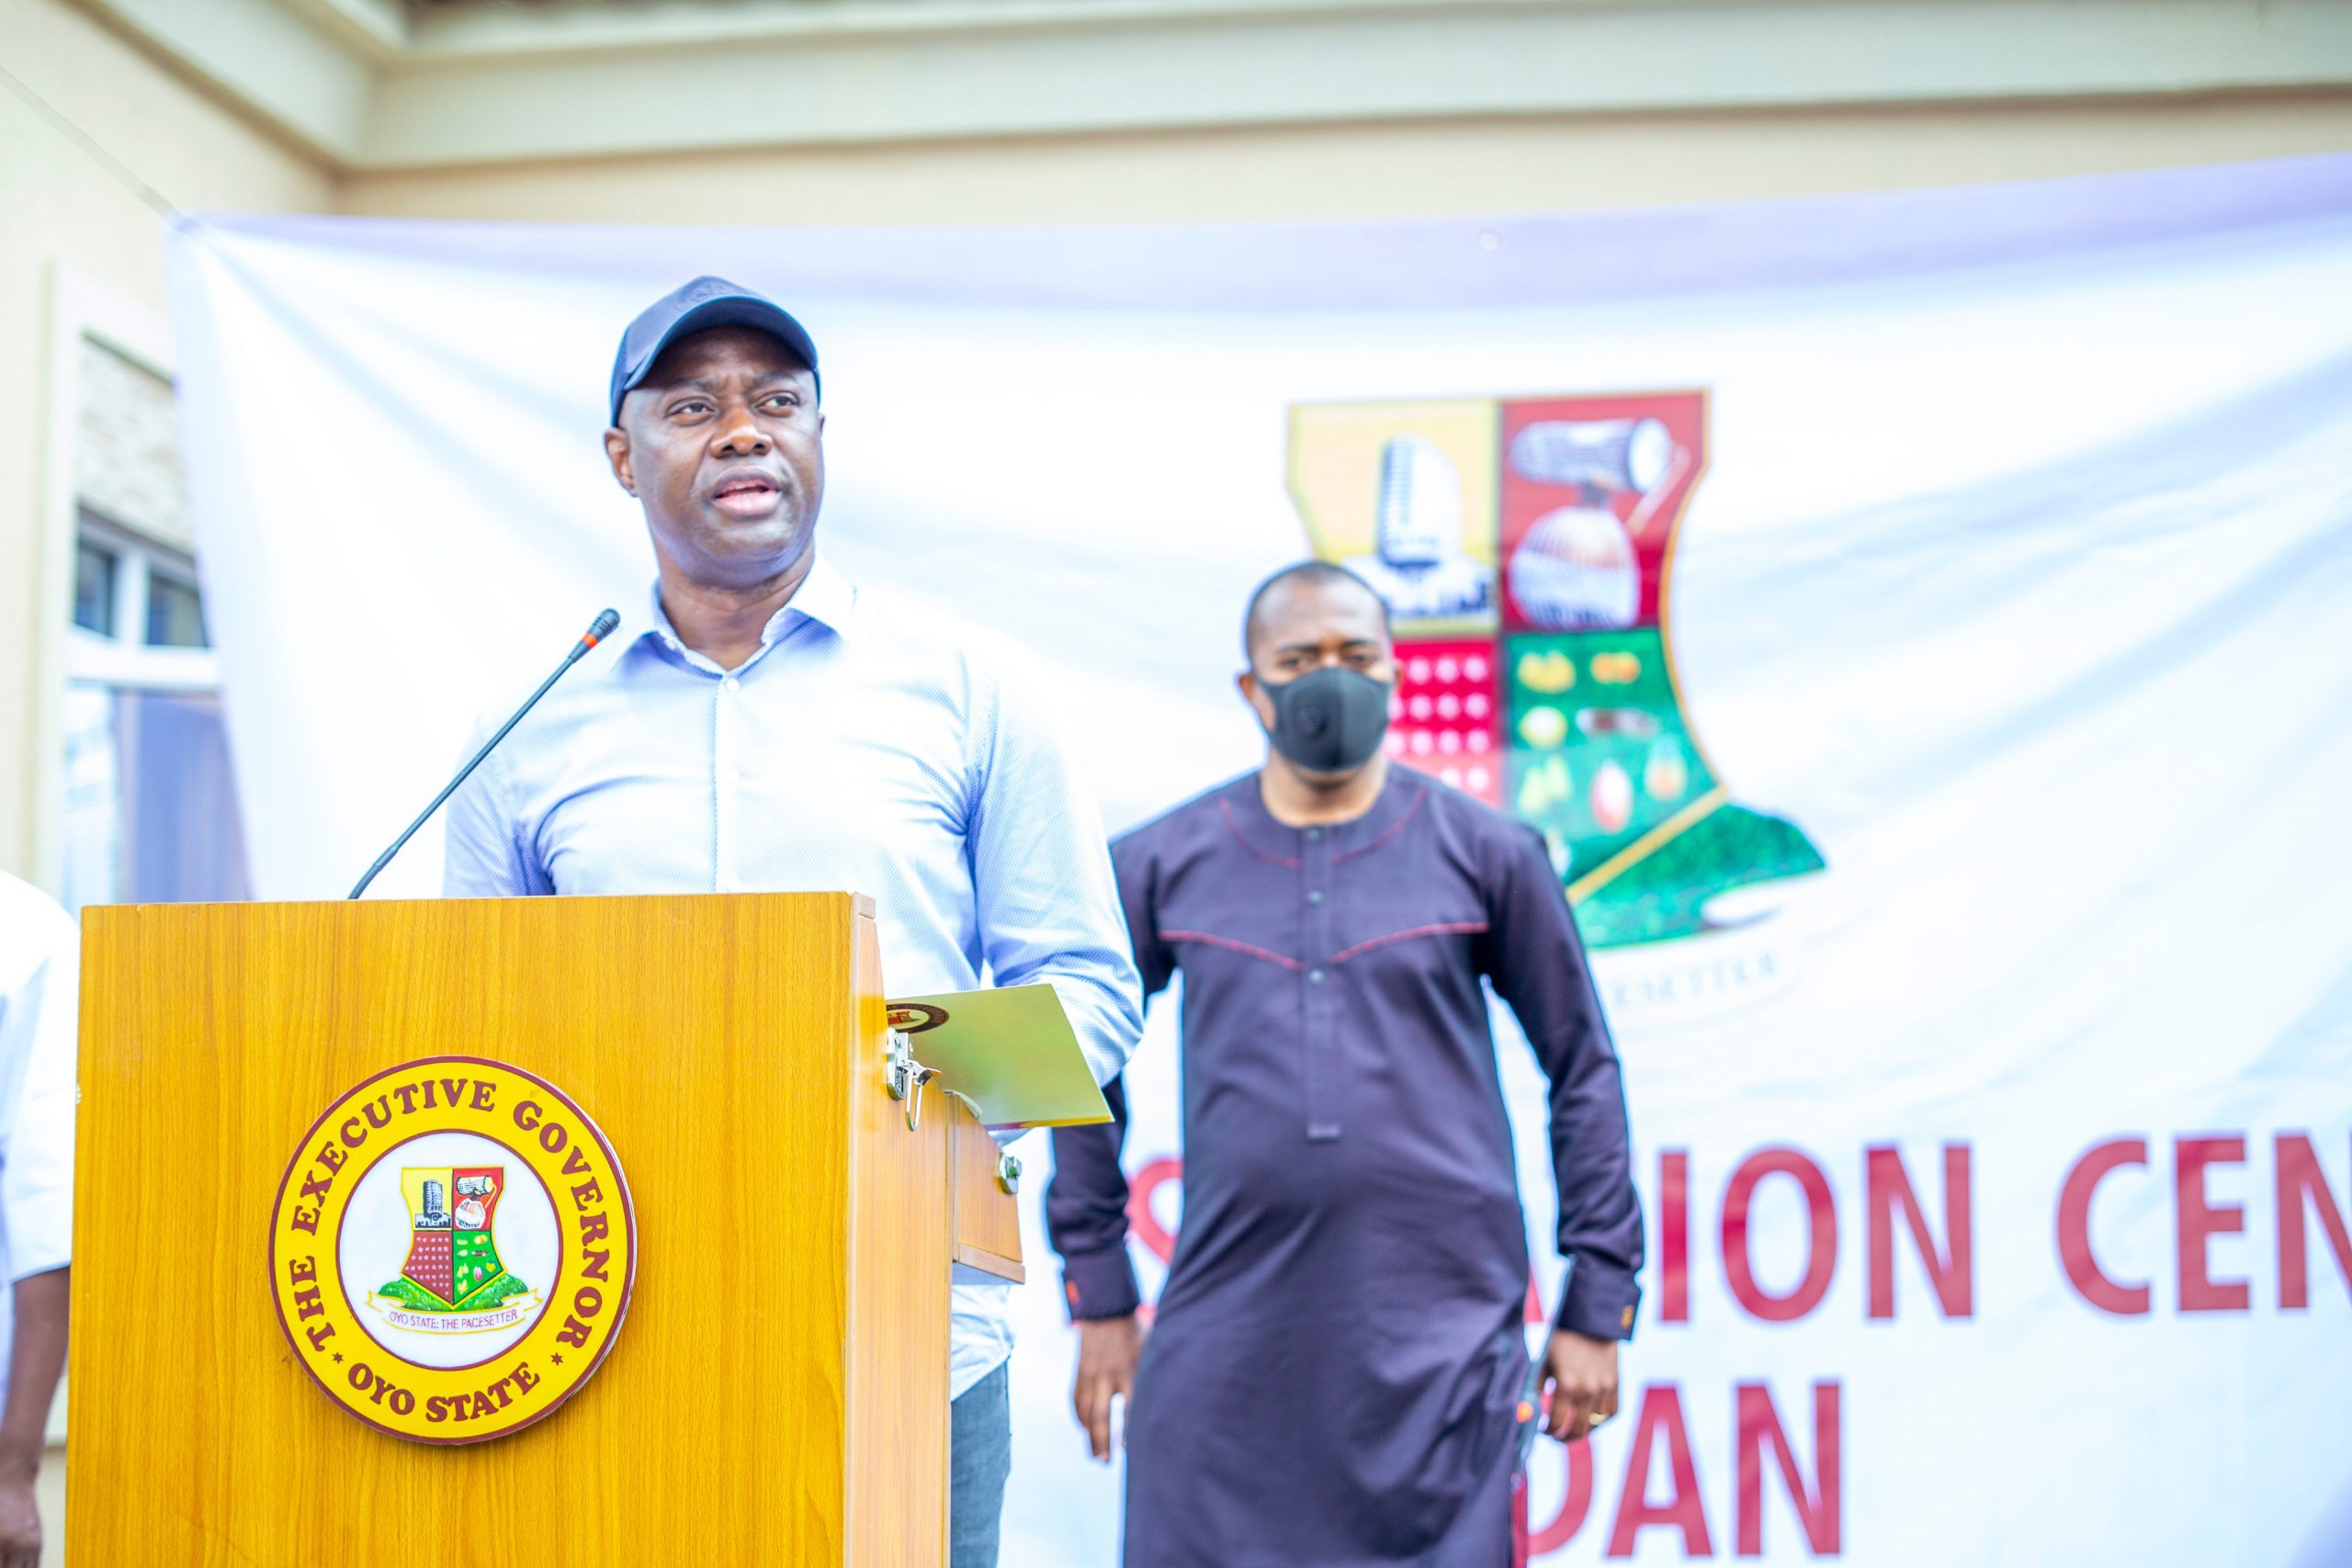 Oyo State Governor, Seyi Makinde inaugurating the Agbami Chest Centre, Jericho which will continue to serve as a temporary isolation centre during this COVID-19 pandemic.